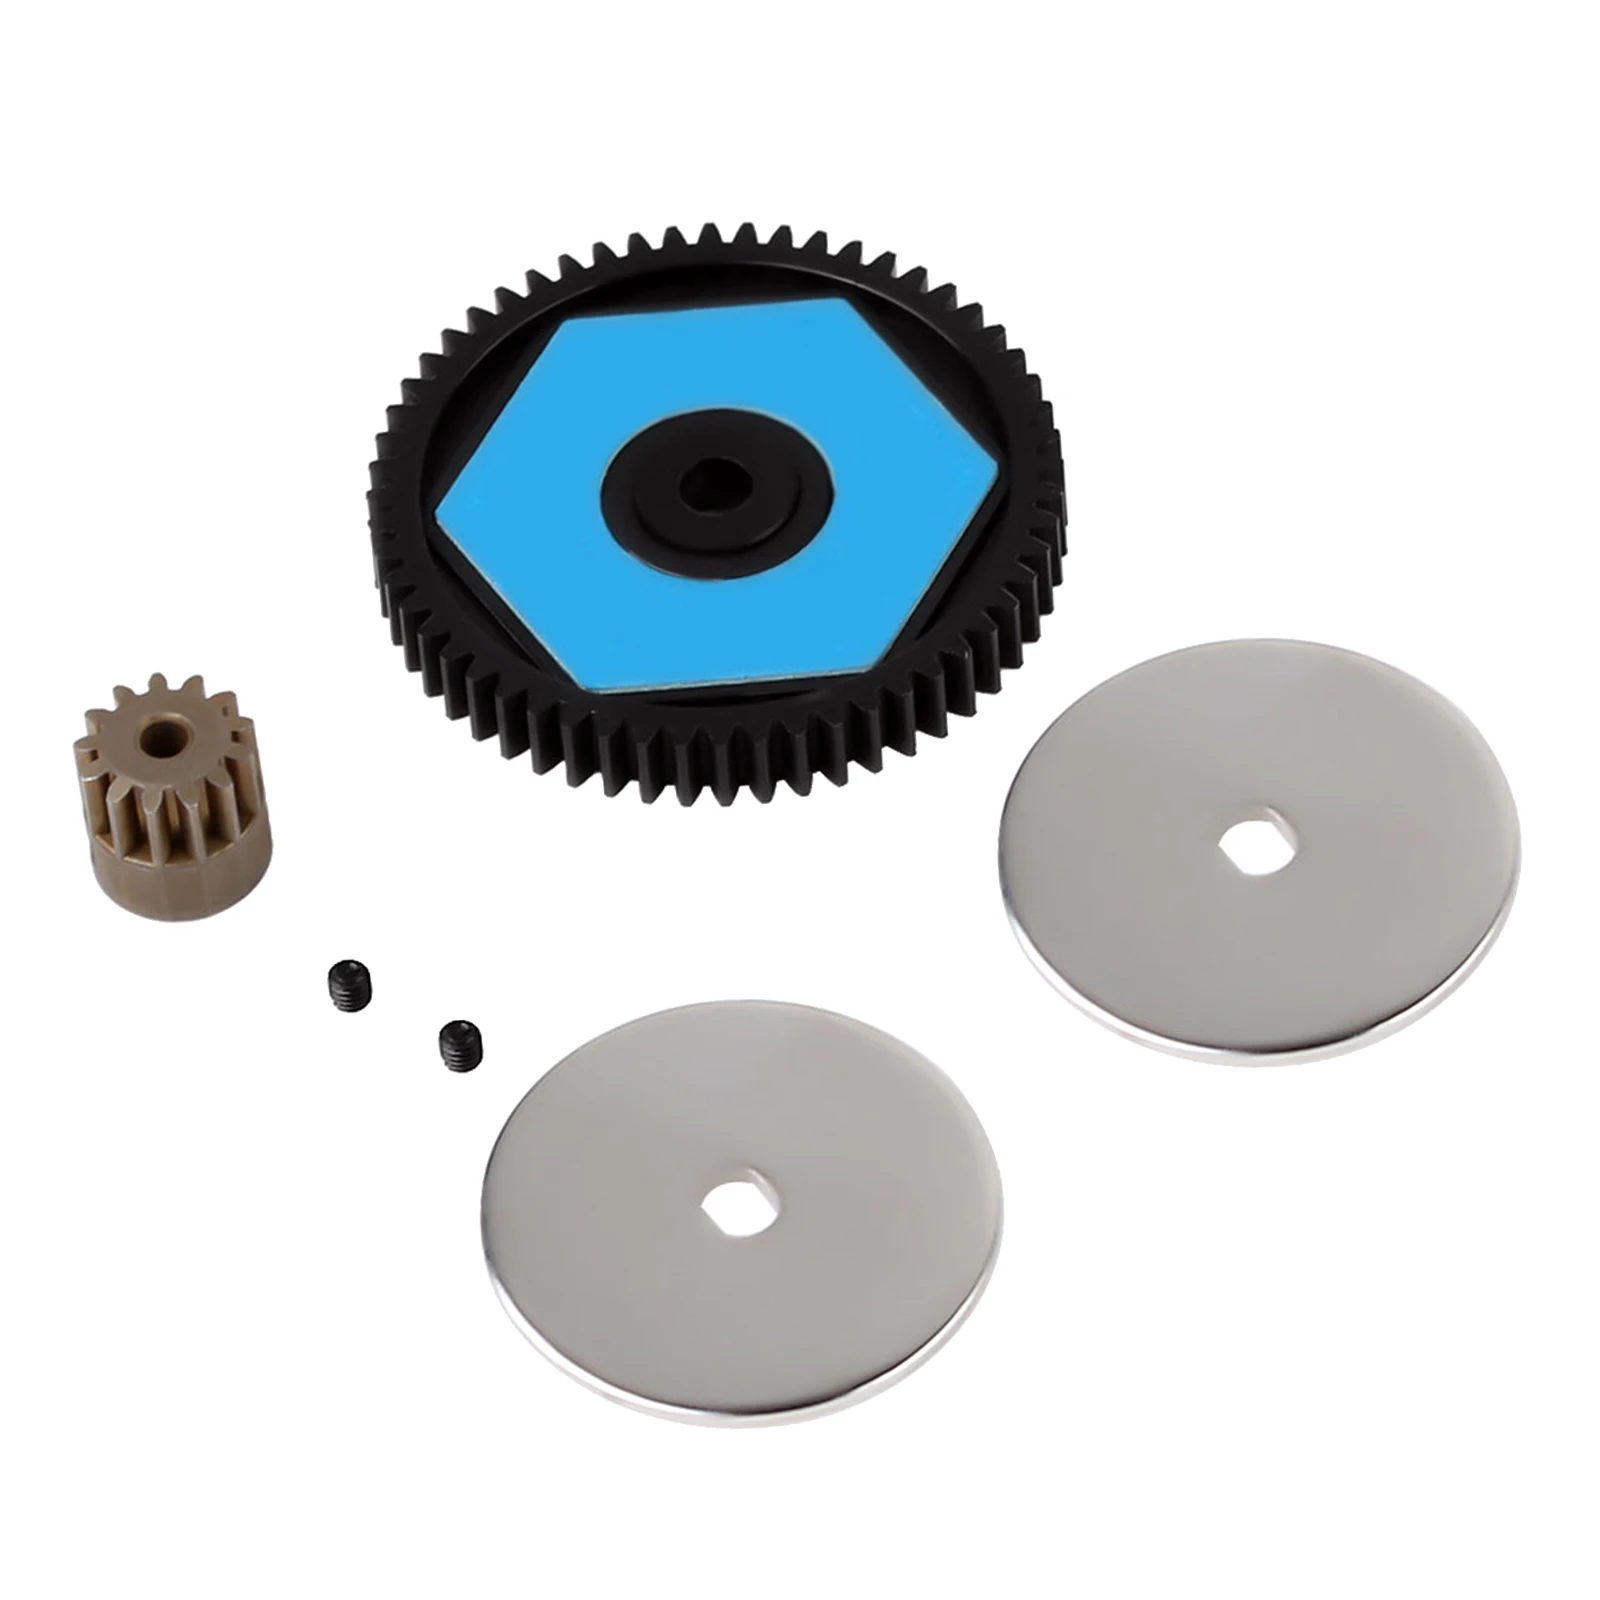 Metal AX31027 56T Spur Gear & 13T Motor Gear Set for Axial SCX10II RC Crawler Vehicle